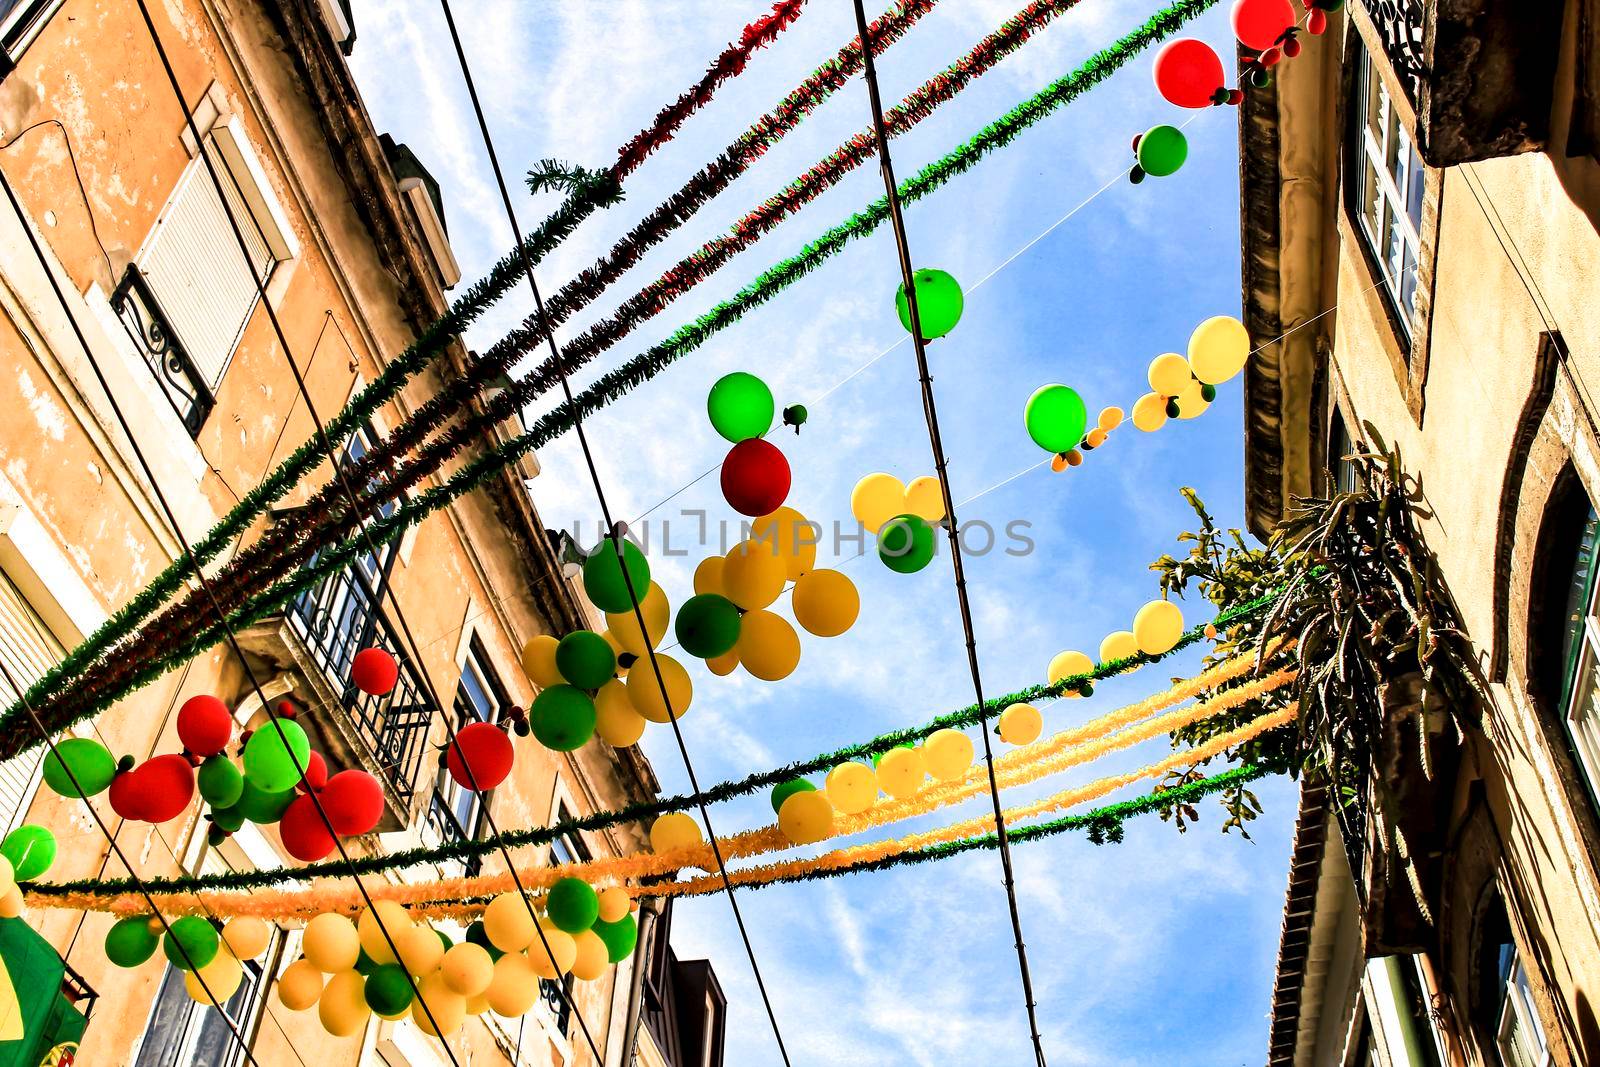 Streets adorned with garlands in Alfama, Lisbon by soniabonet